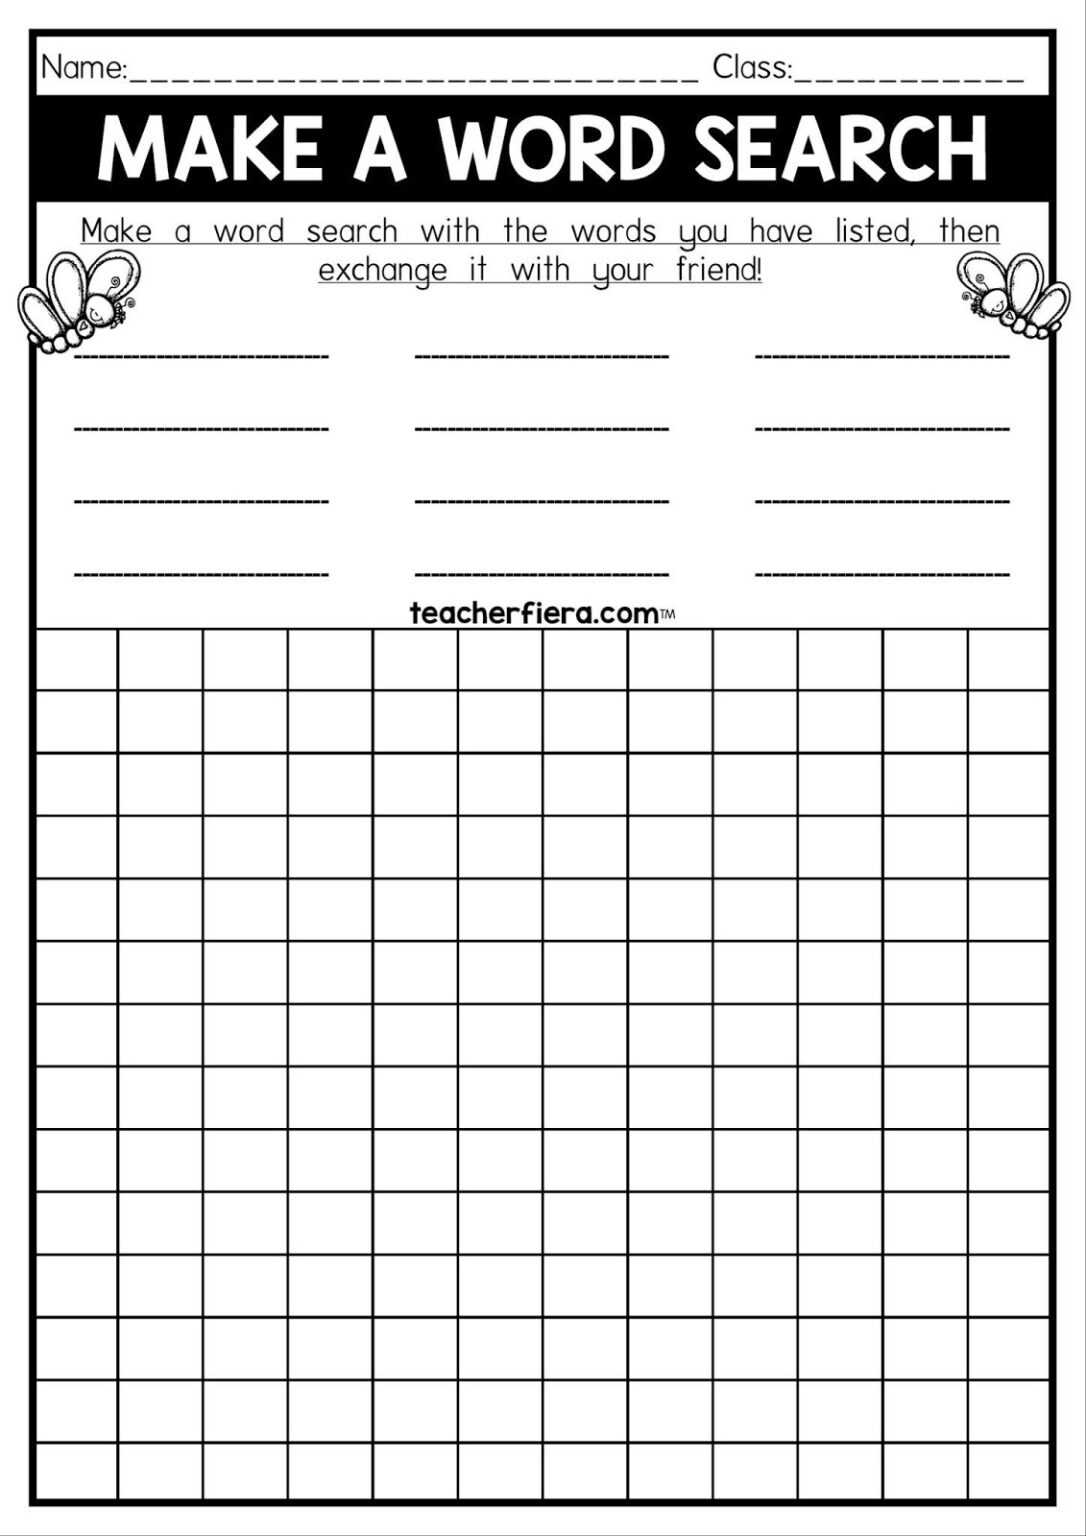 Make your own word search free printable